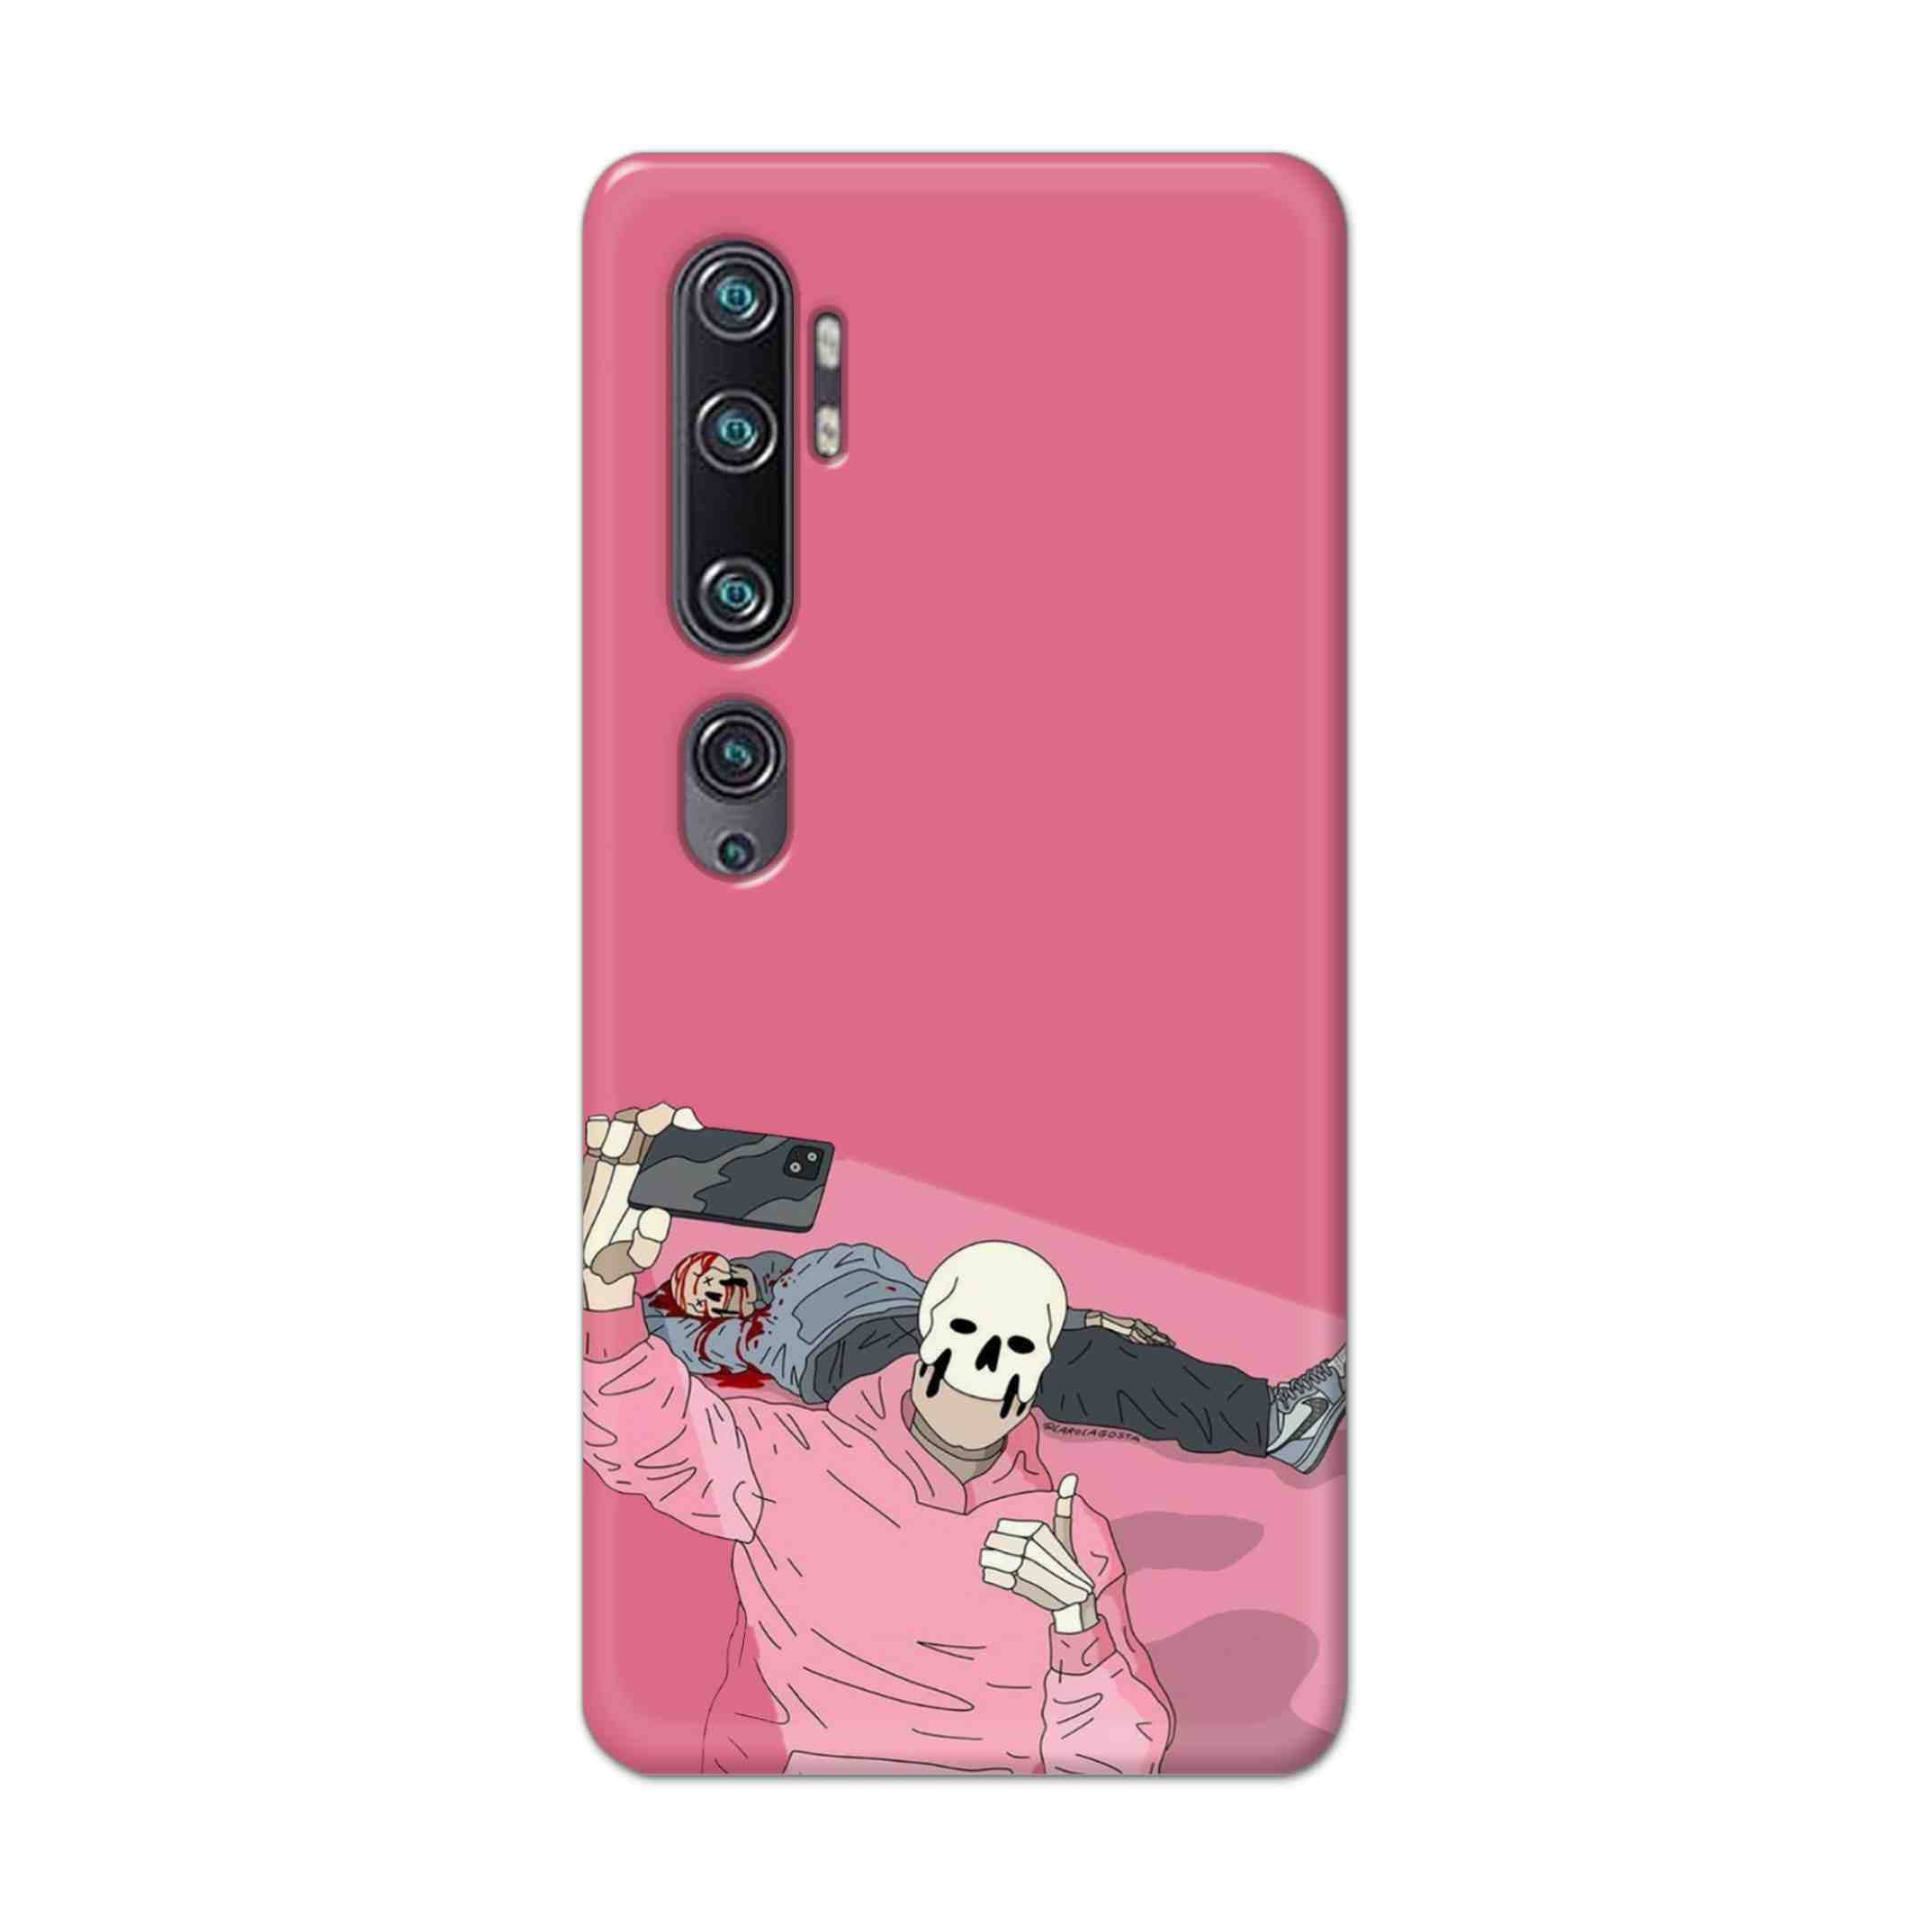 Buy Selfie Hard Back Mobile Phone Case Cover For Xiaomi Mi Note 10 Online